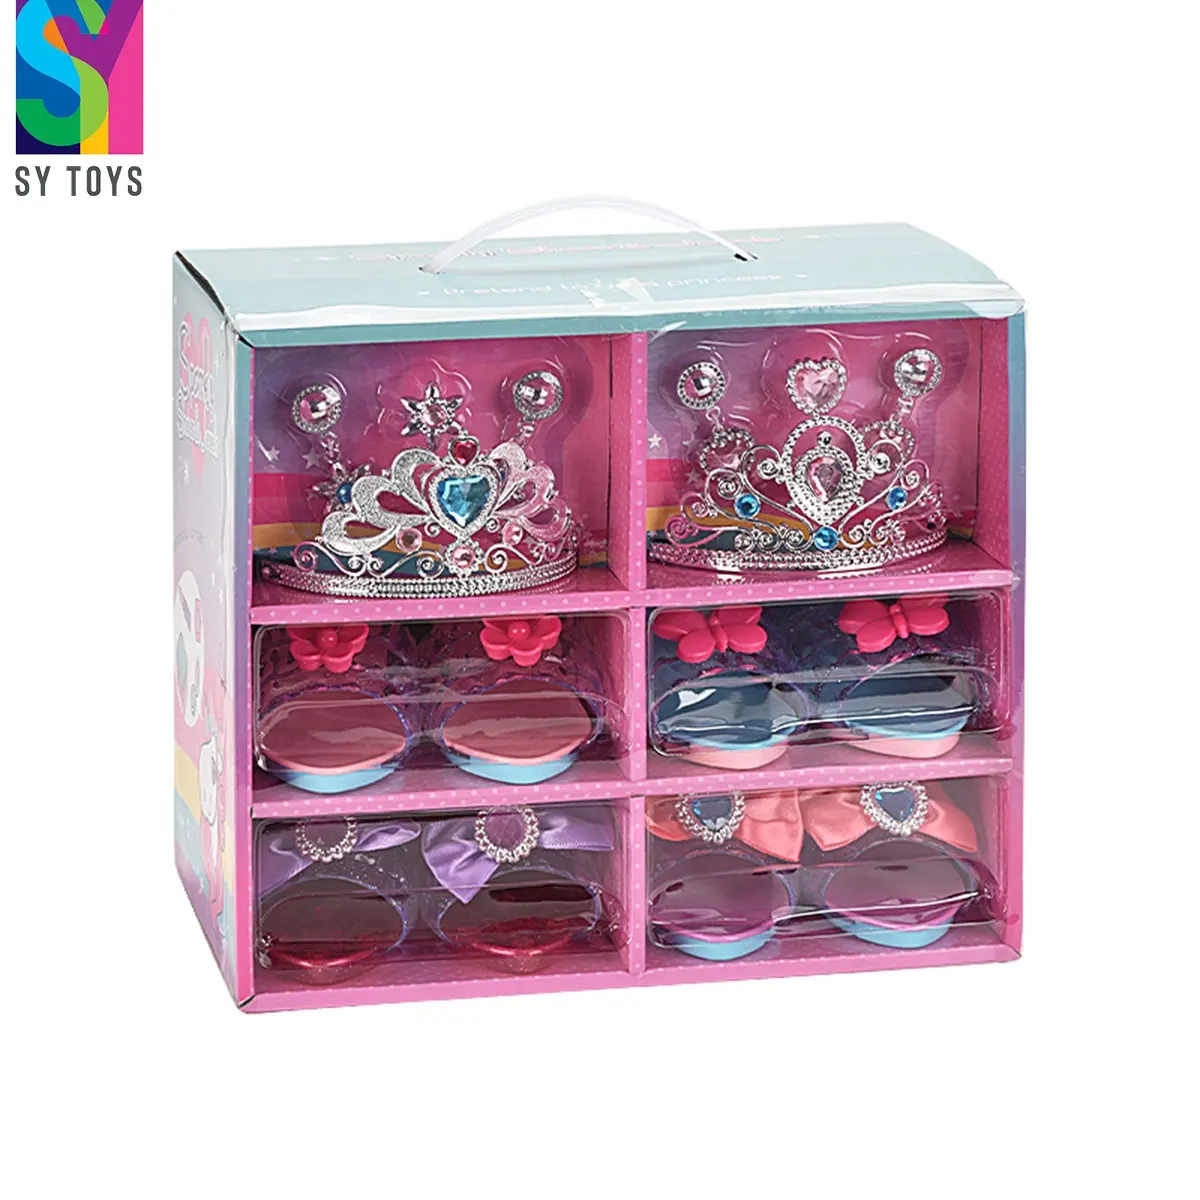 SY Girls Beautiful Princess Shoes Play Toys Princess Crown Beauty Set Toy Comb Shoes Jewelry Combination